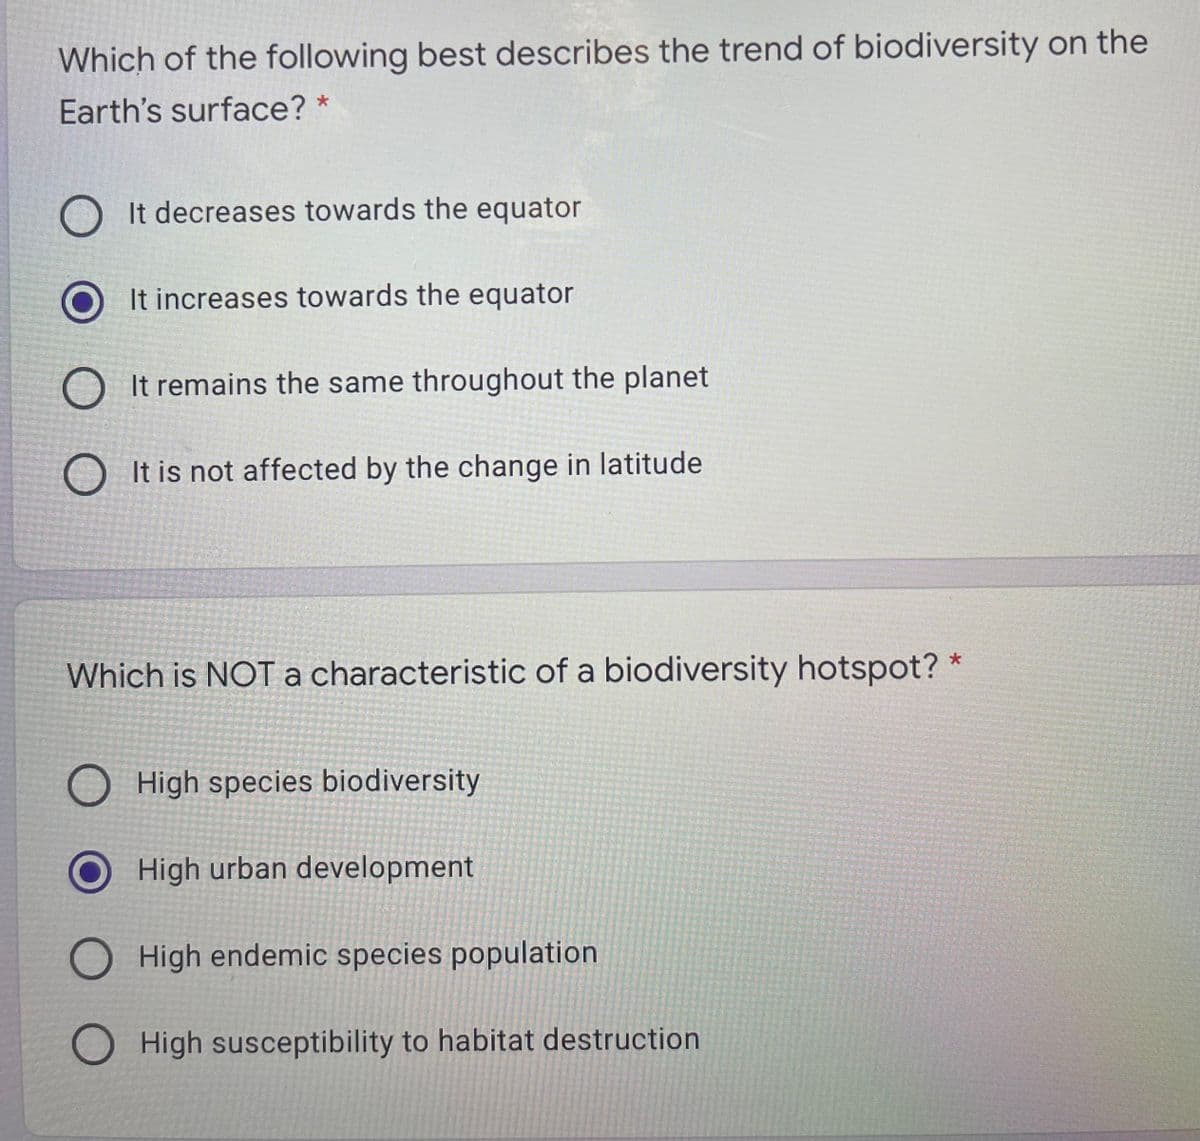 Which of the following best describes the trend of biodiversity on the
Earth's surface? *
O It decreases towards the equator
It increases towards the equator
O It remains the same throughout the planet
O It is not affected by the change in latitude
Which is NOTa characteristic of a biodiversity hotspot? *
O High species biodiversity
High urban development
O High endemic species population
O High susceptibility to habitat destruction
